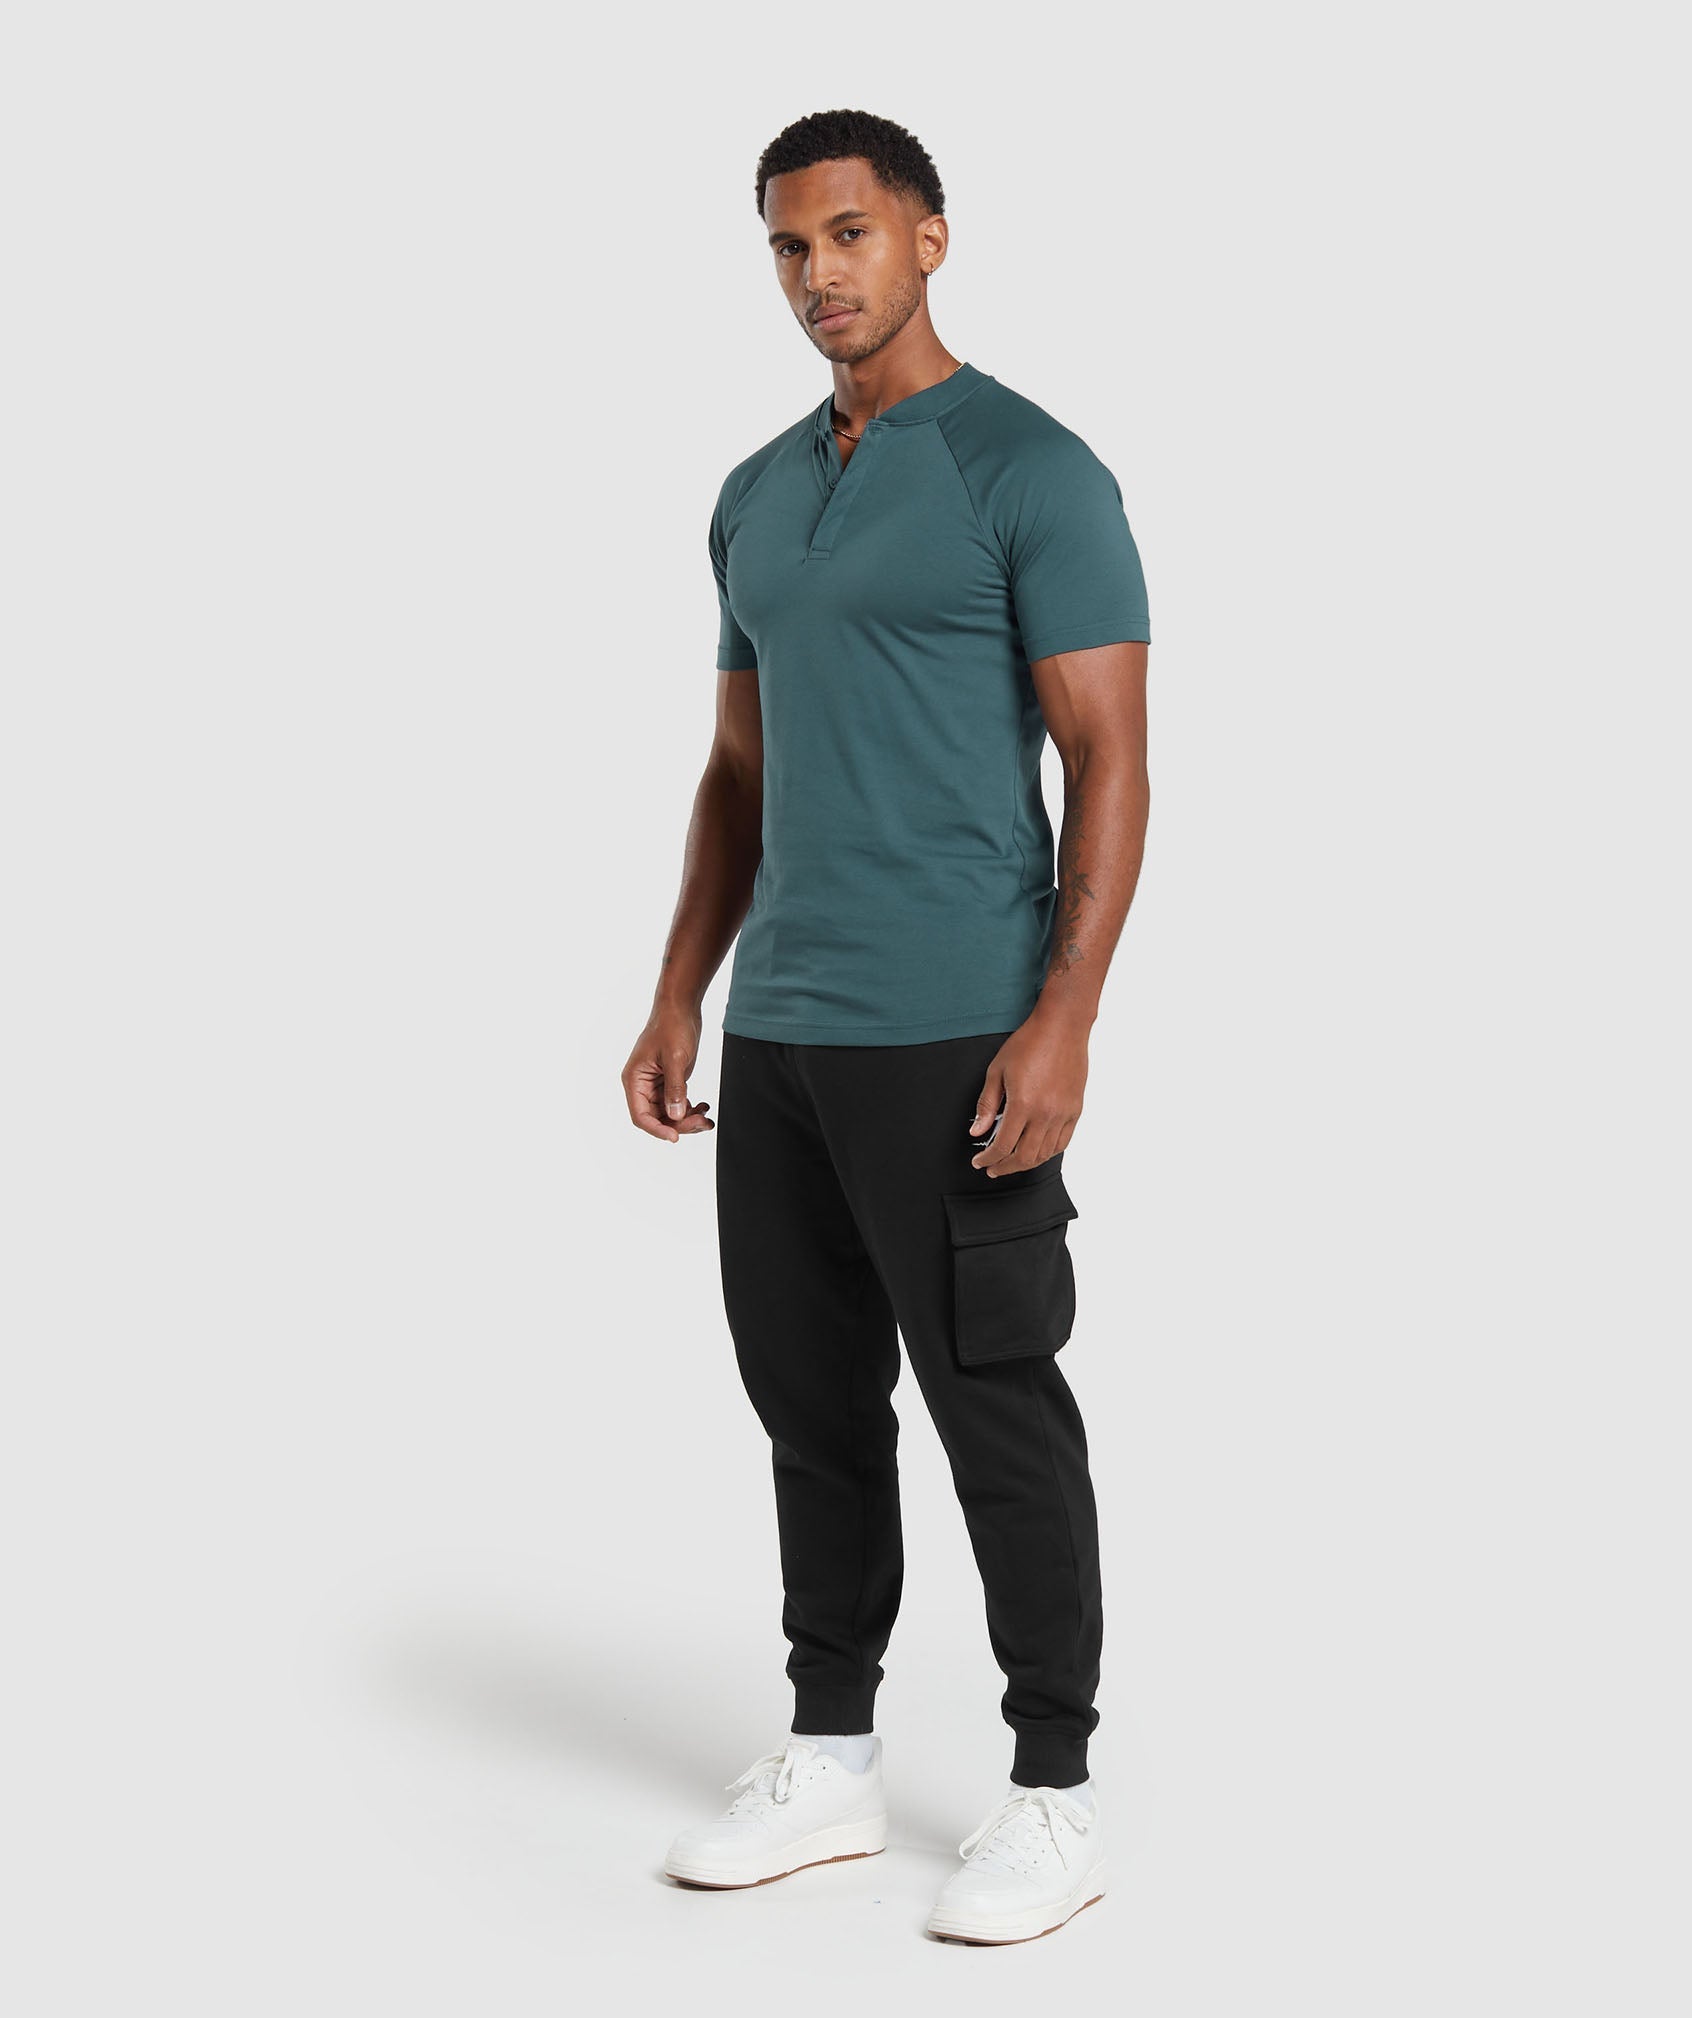 Rest Day Commute Polo Shirt in Smokey Teal - view 4